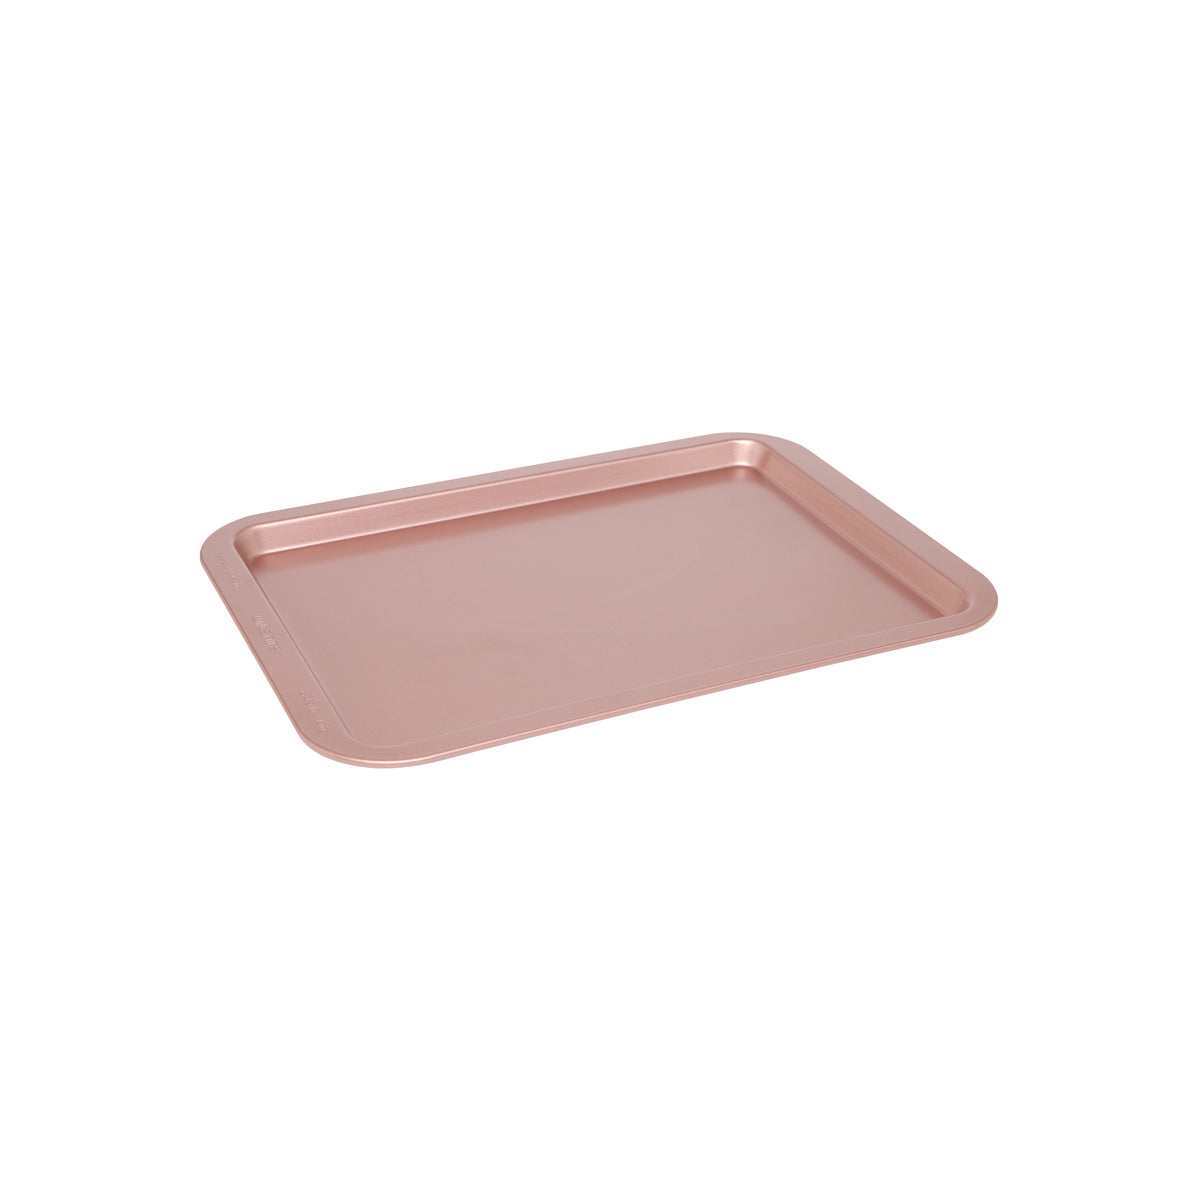 WLT40828 Wiltshire Rose Gold Cookie Sheet 335mm Tomkin Australia Hospitality Supplies